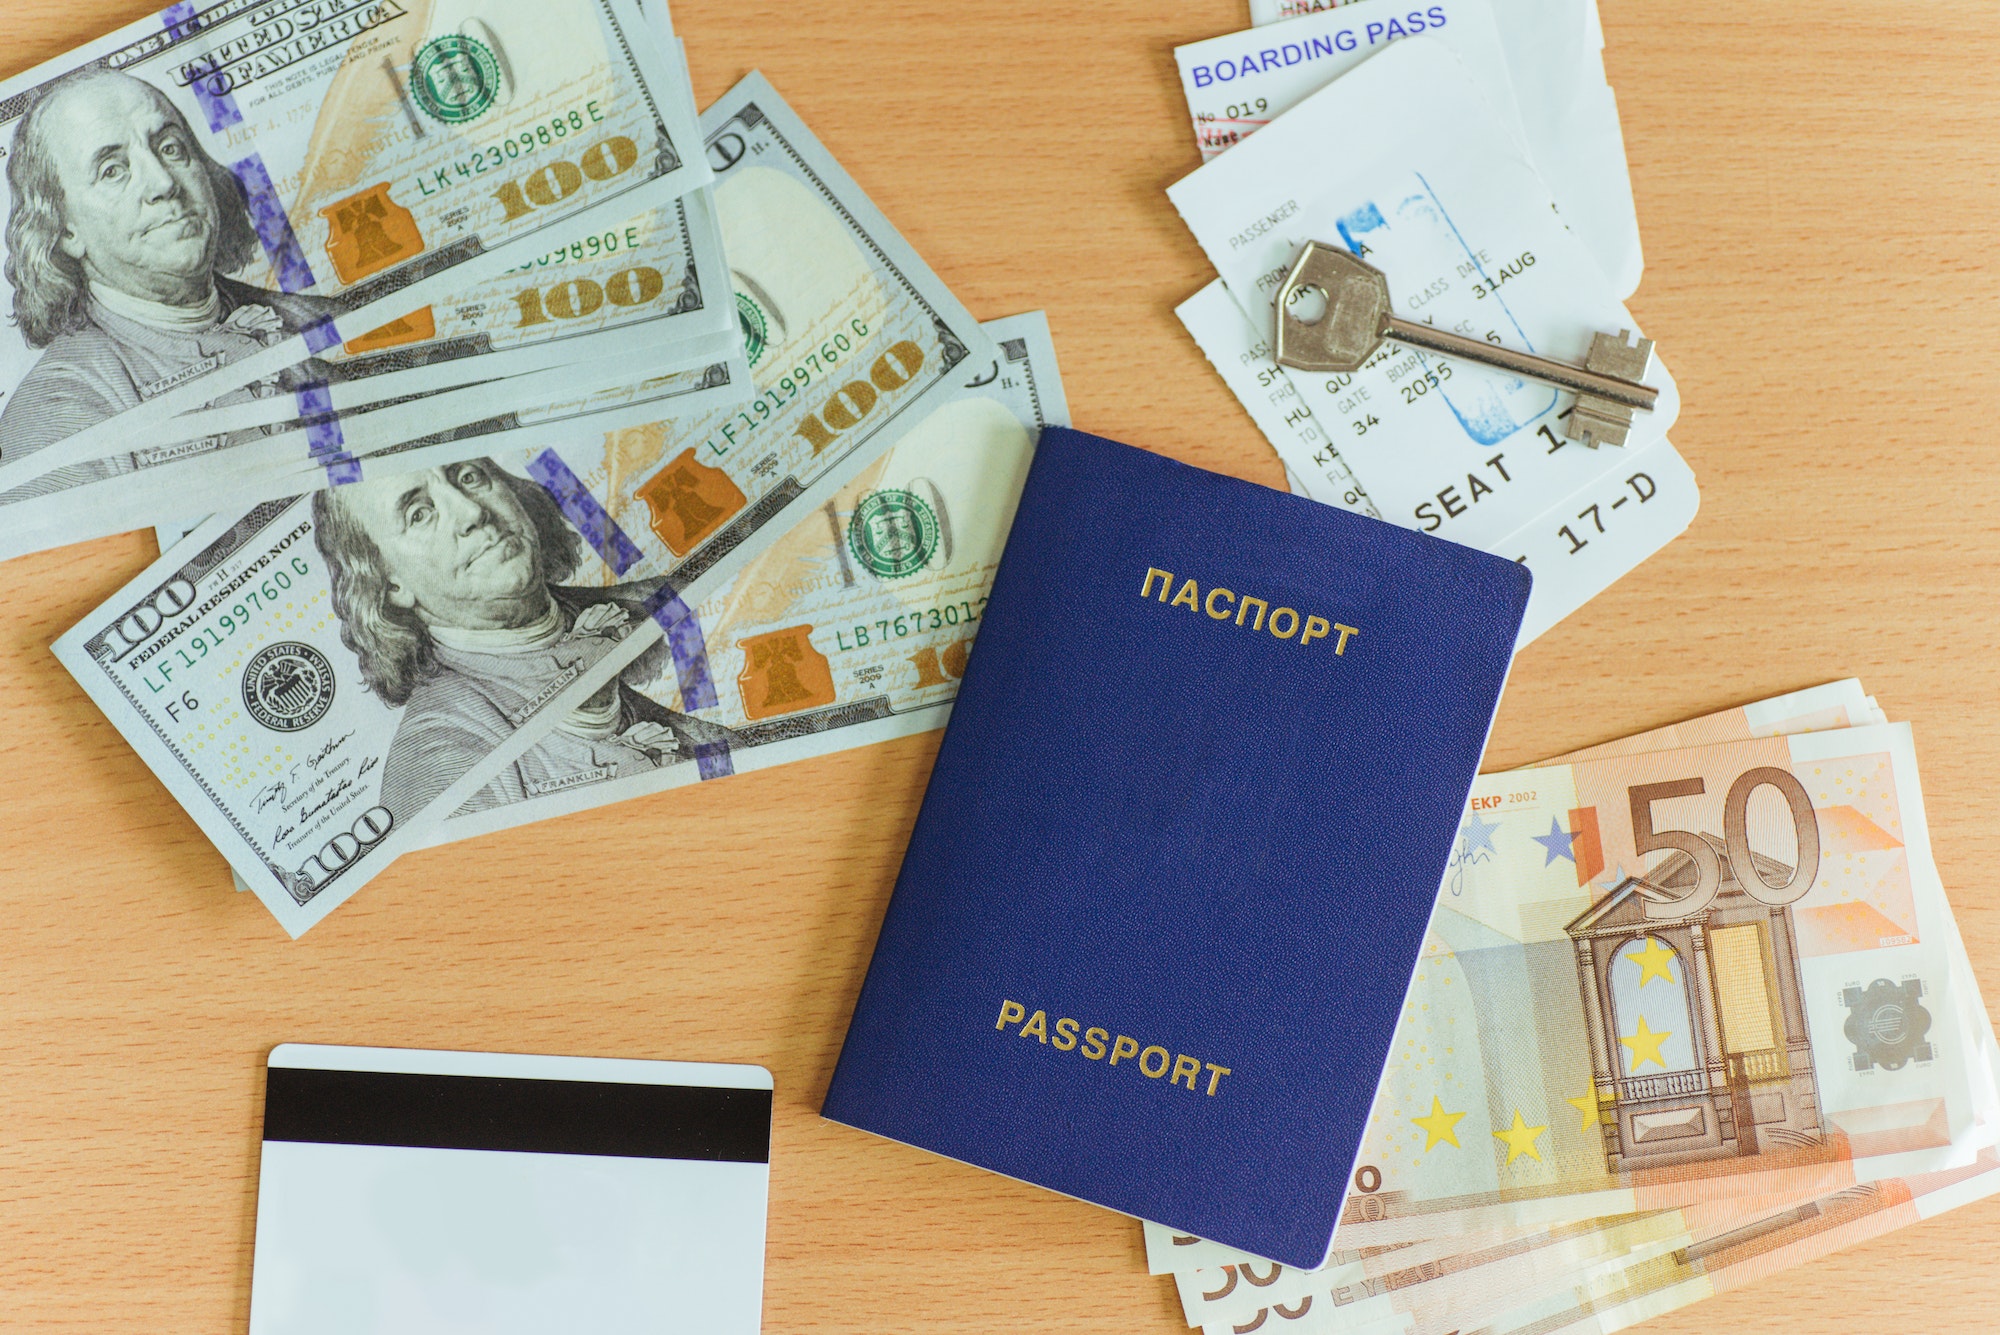 passport, dollars, key, and bank card on a wooden background.